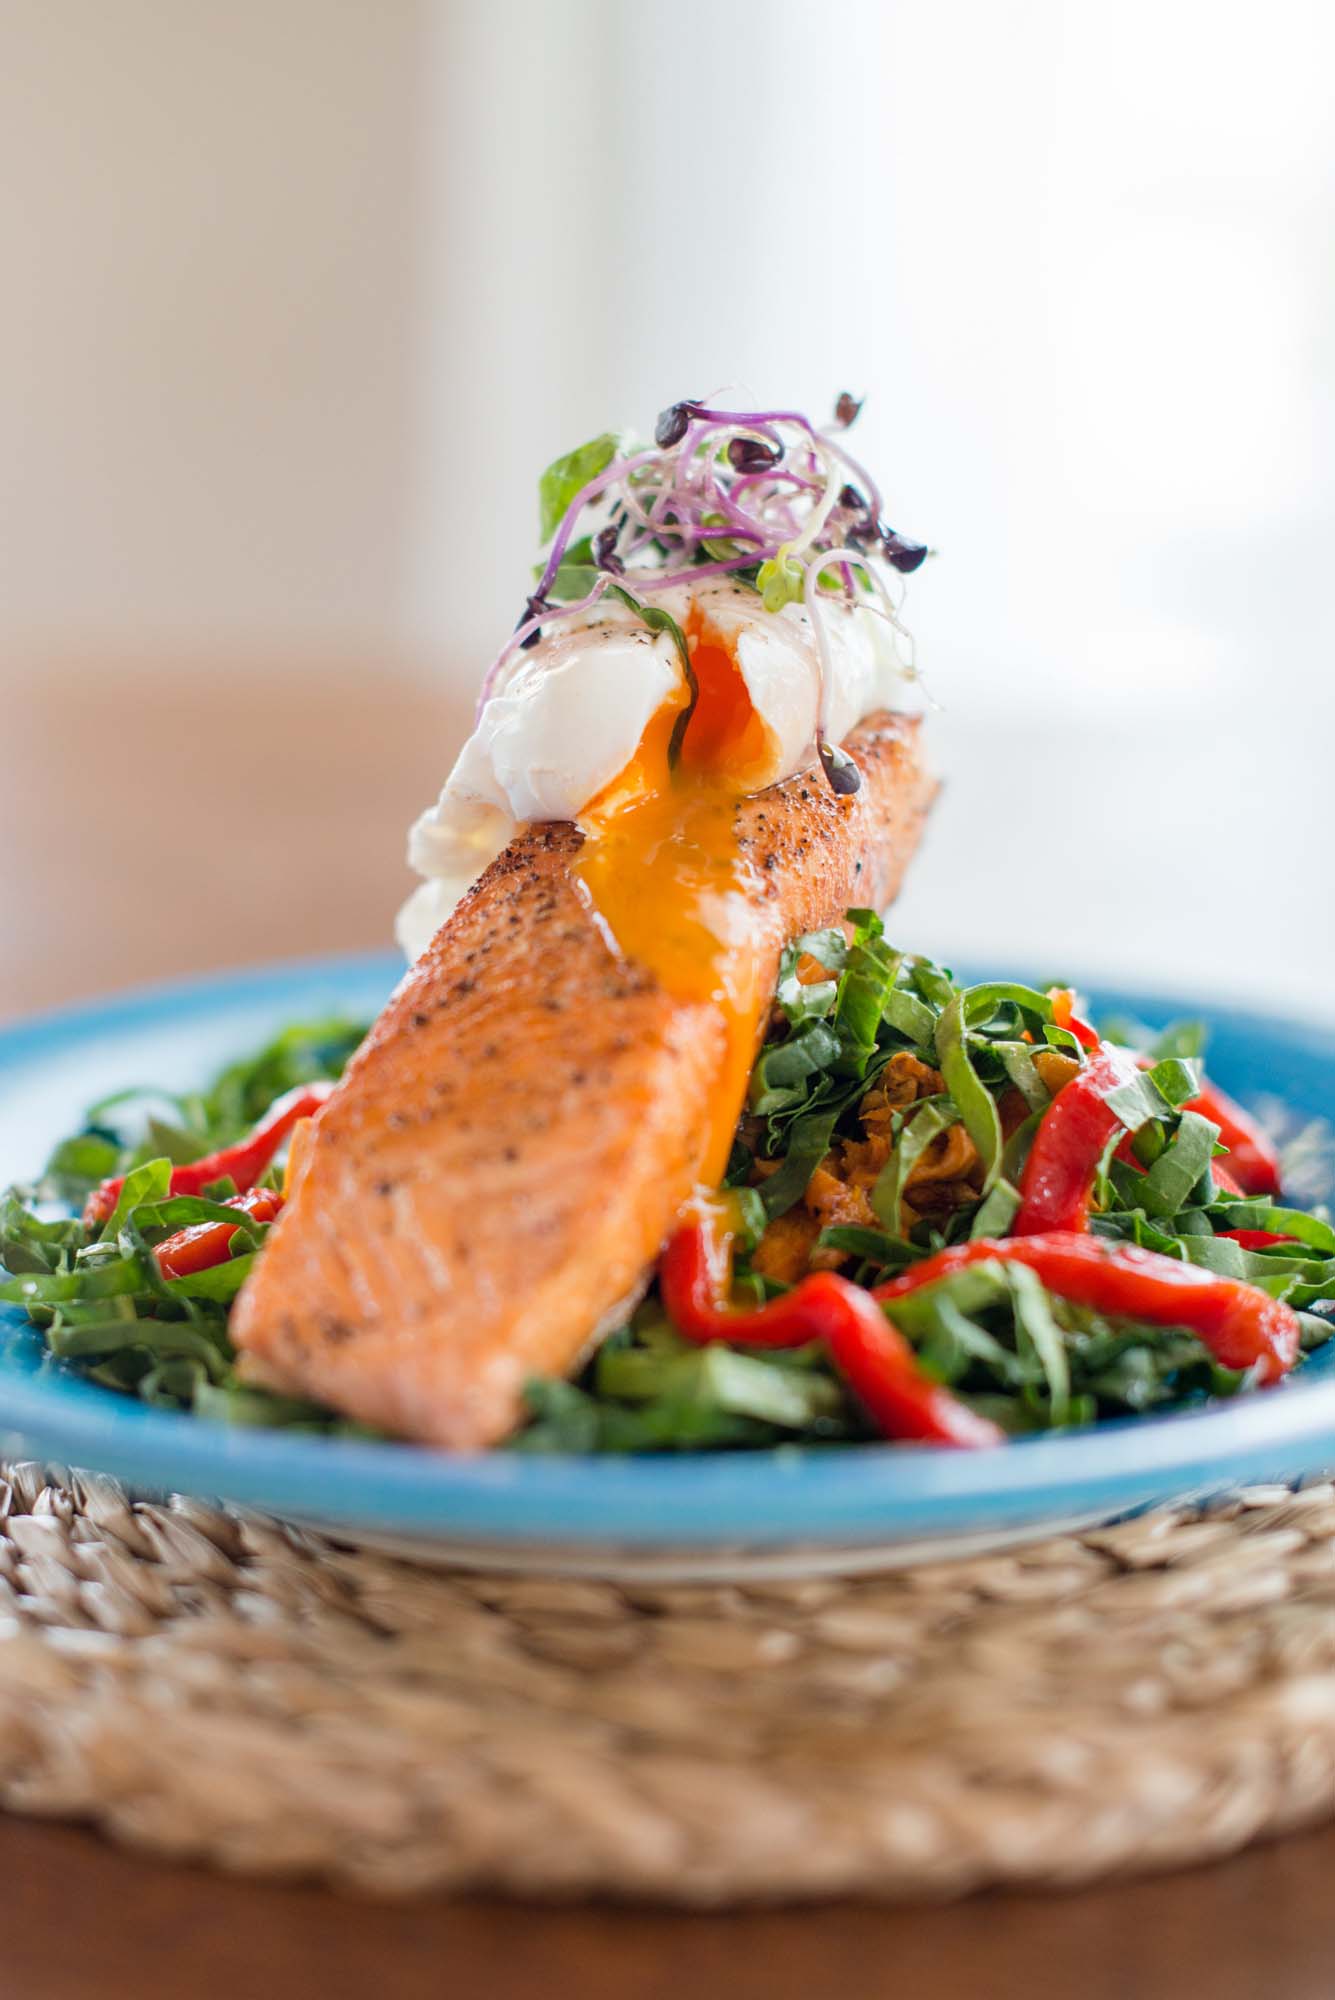 Chef Ben Whale's roast salmon with sweet potato hash and poached egg